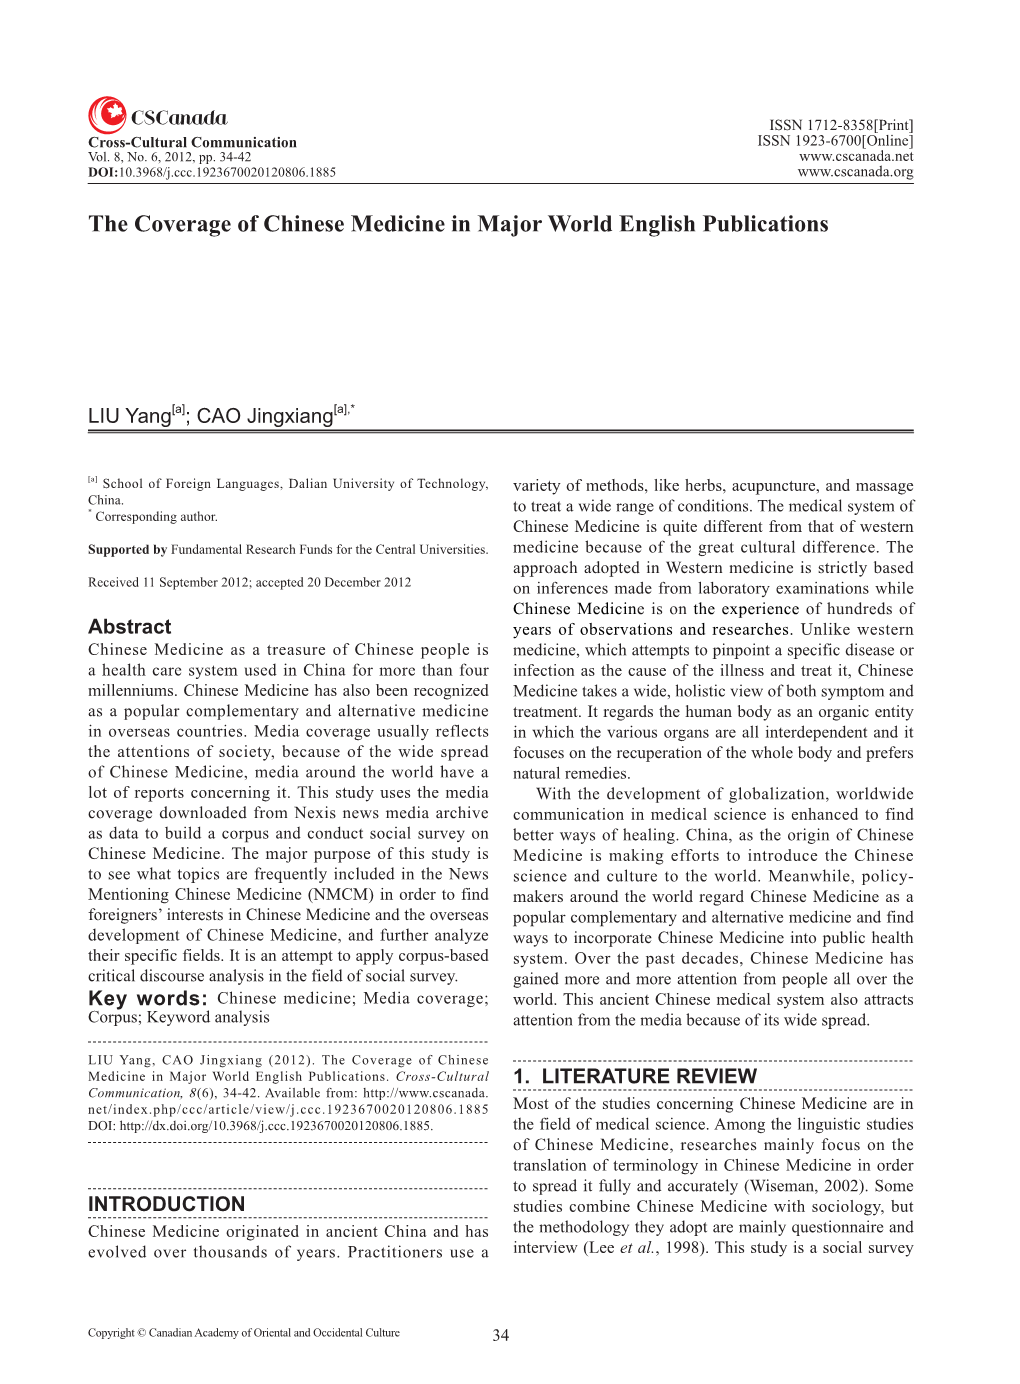 The Coverage of Chinese Medicine in Major World English Publications